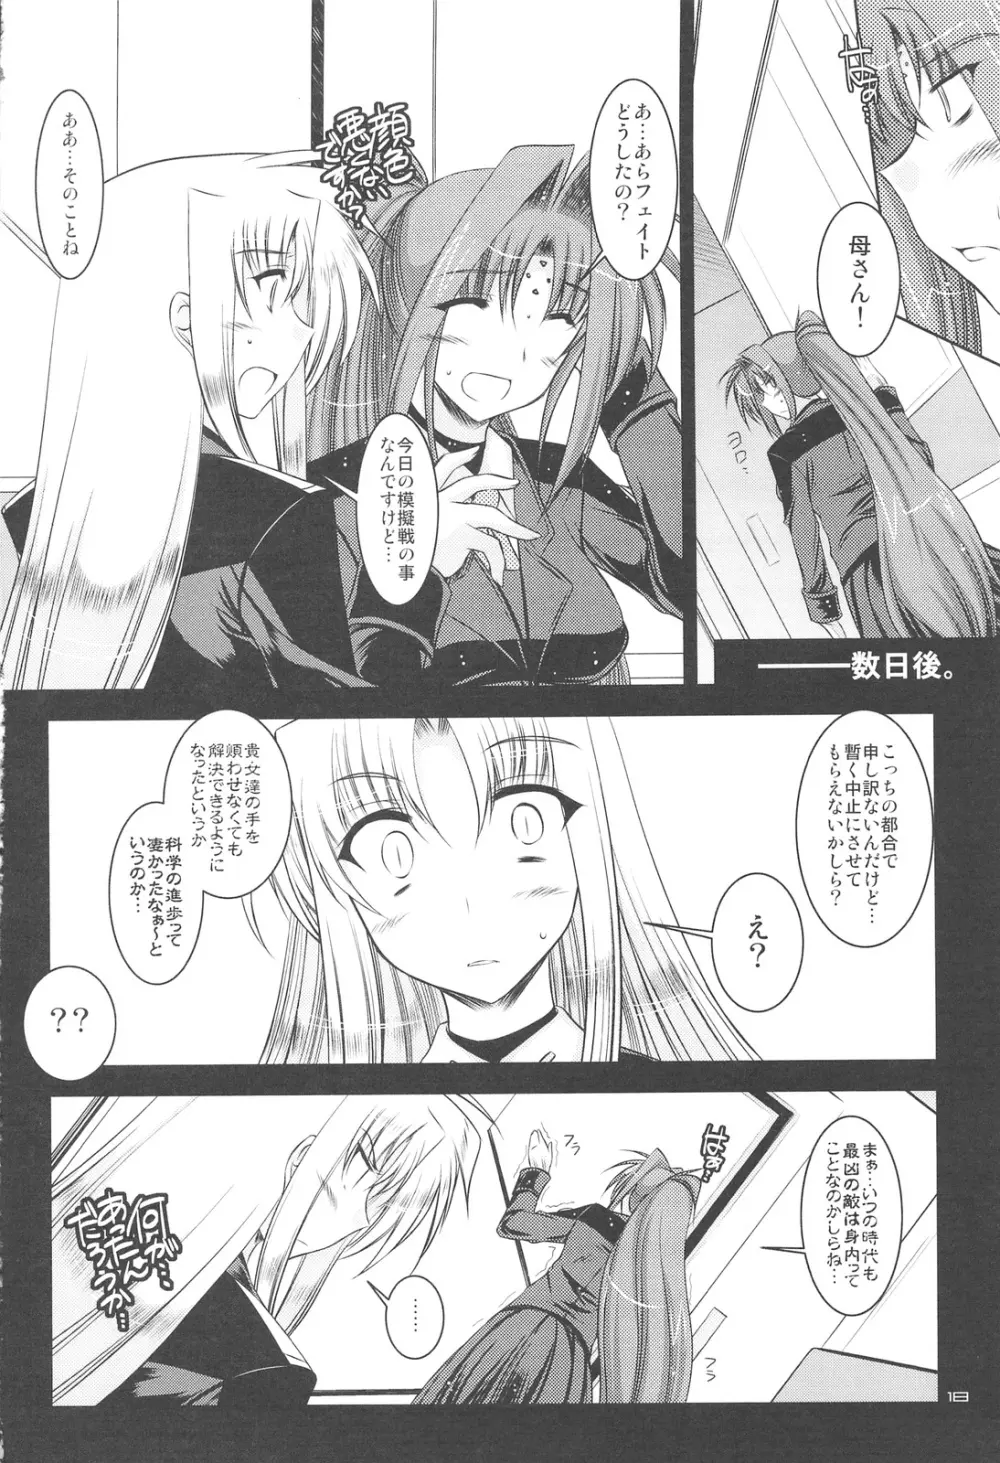 ANOTHER FRONTIER 2.5 魔法少女リリカルリンディさん #04 Page.17